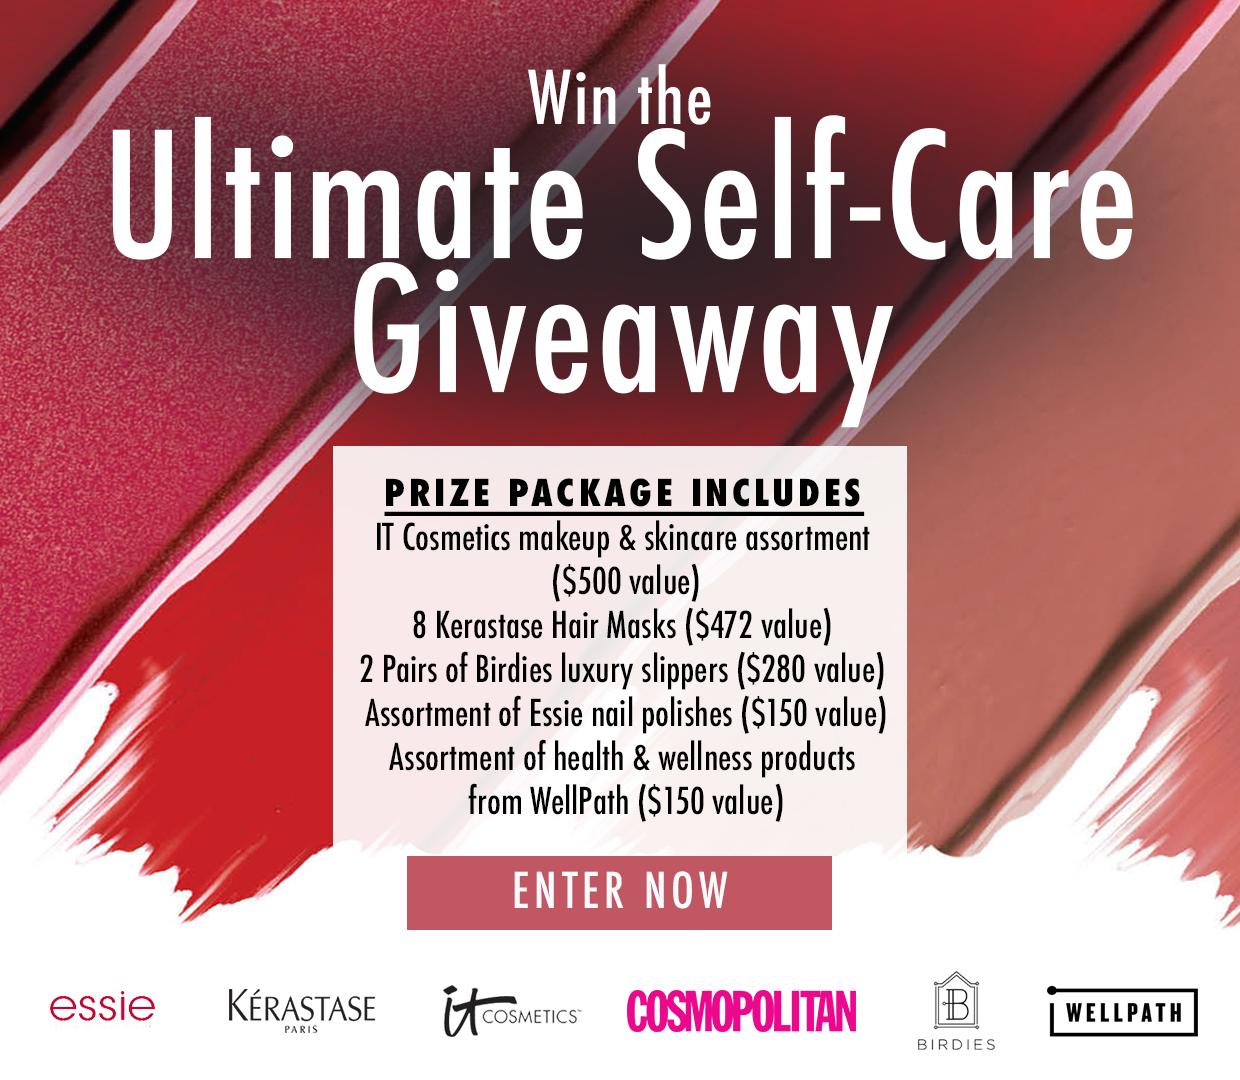 Enter to Win the Ultimate Self-Care Package Worth $1500+!